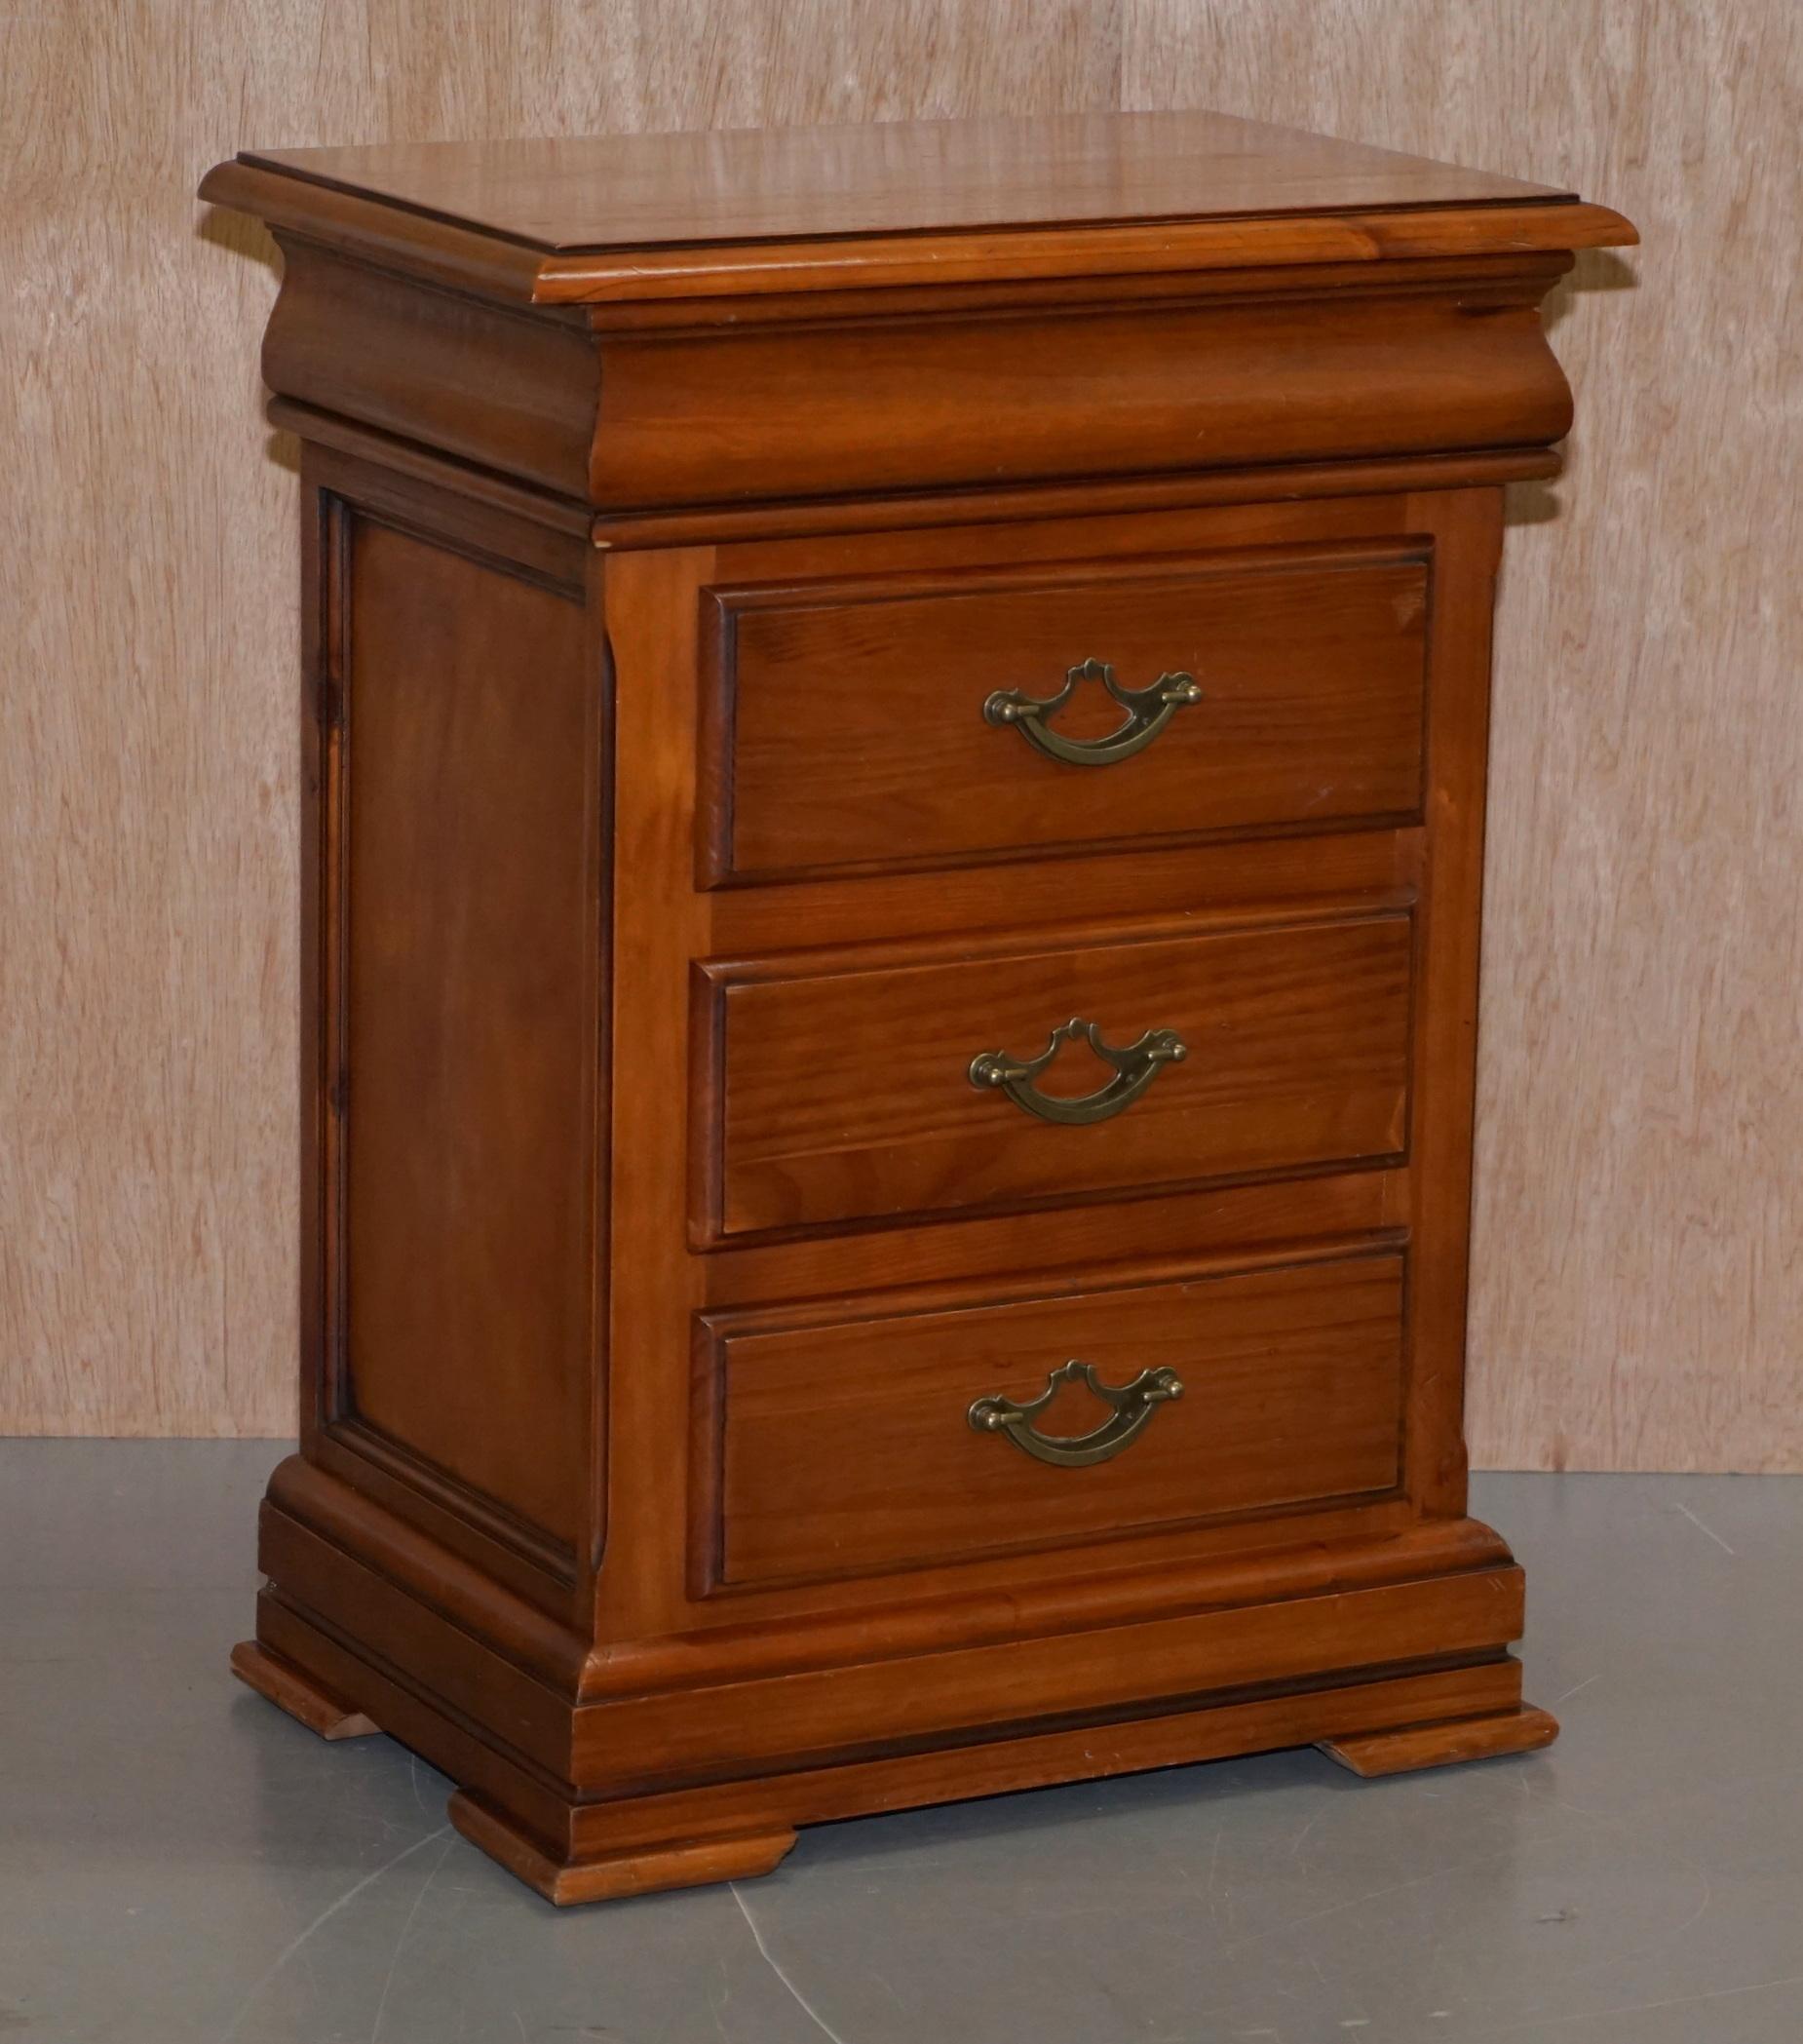 Pair of Bedside Table Drawers with Four Drawers Each, Cherry Color Wood 4